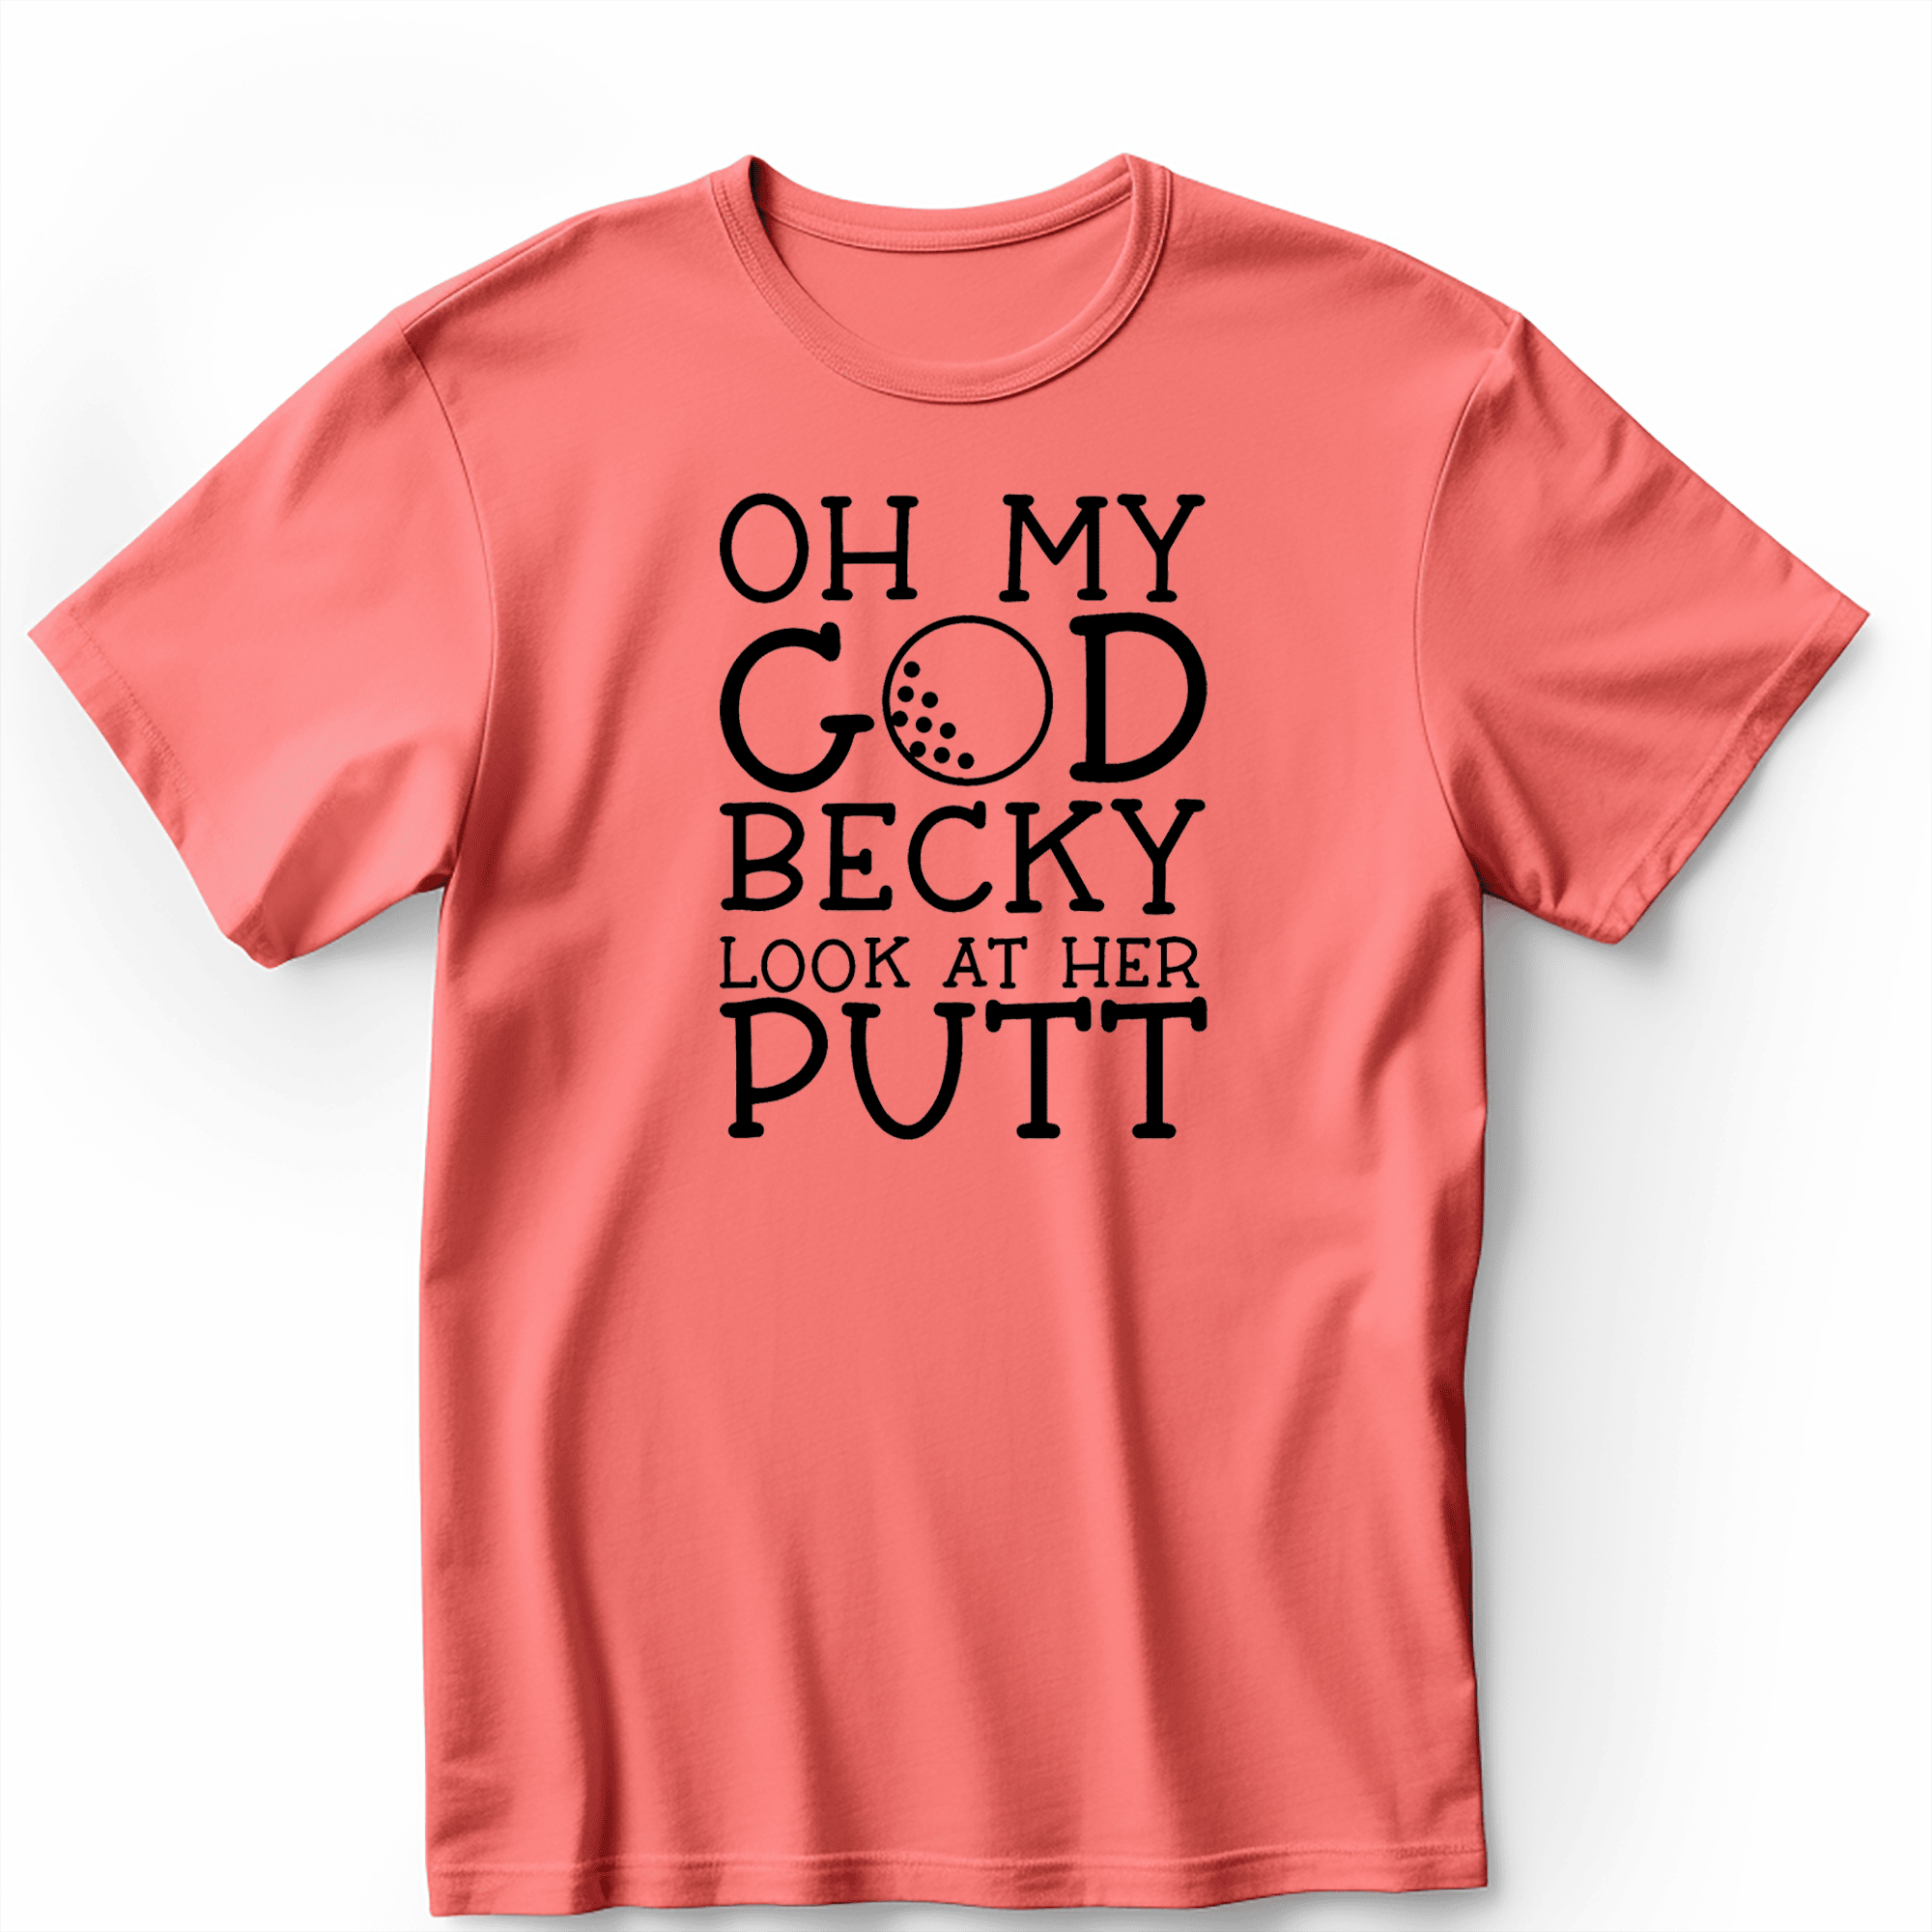 Light Red Mens T-Shirt With Look At Her Putt Design